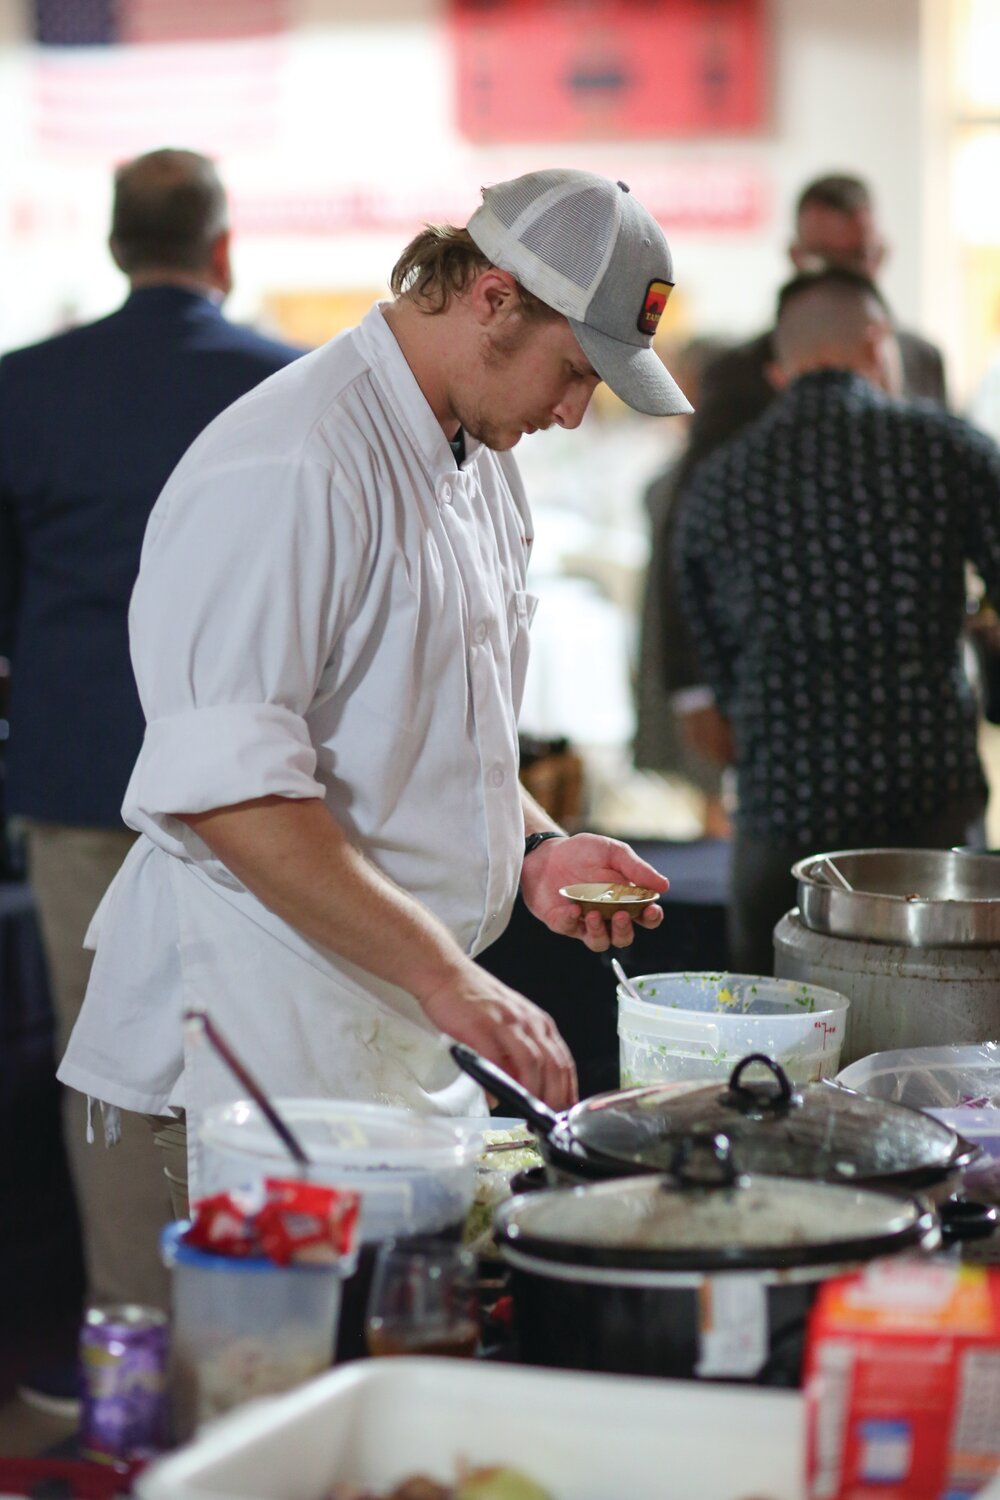 Henry Taylor, a senior at Wabash College, works as Warner’s sous chef. He will prepare a dessert which includes apple spice cake muffins and cookies and cream ice cream.